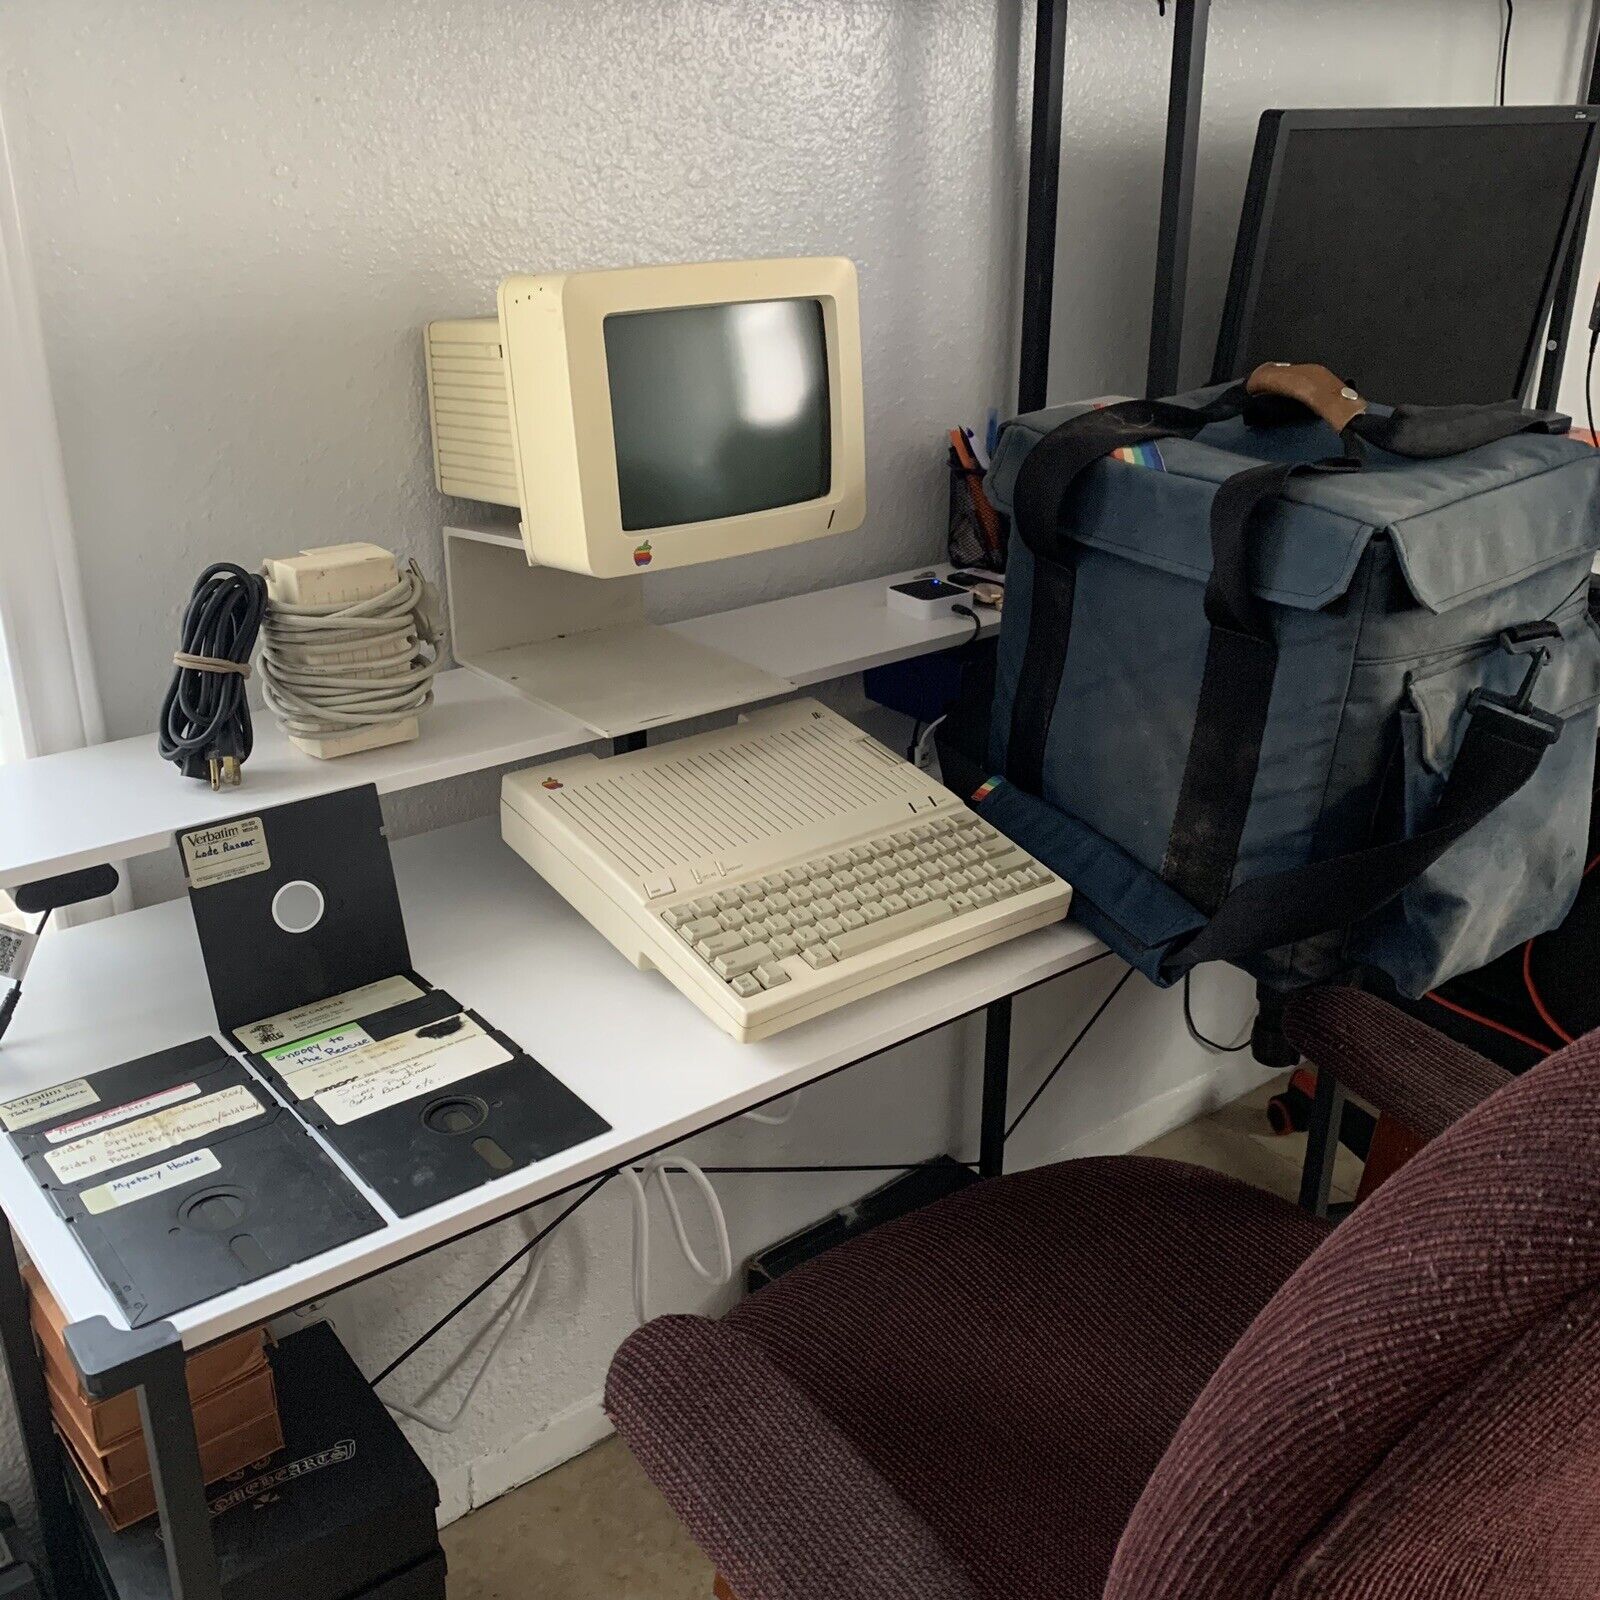 1985 Apple 2c Computer A2S4000 with Monitor